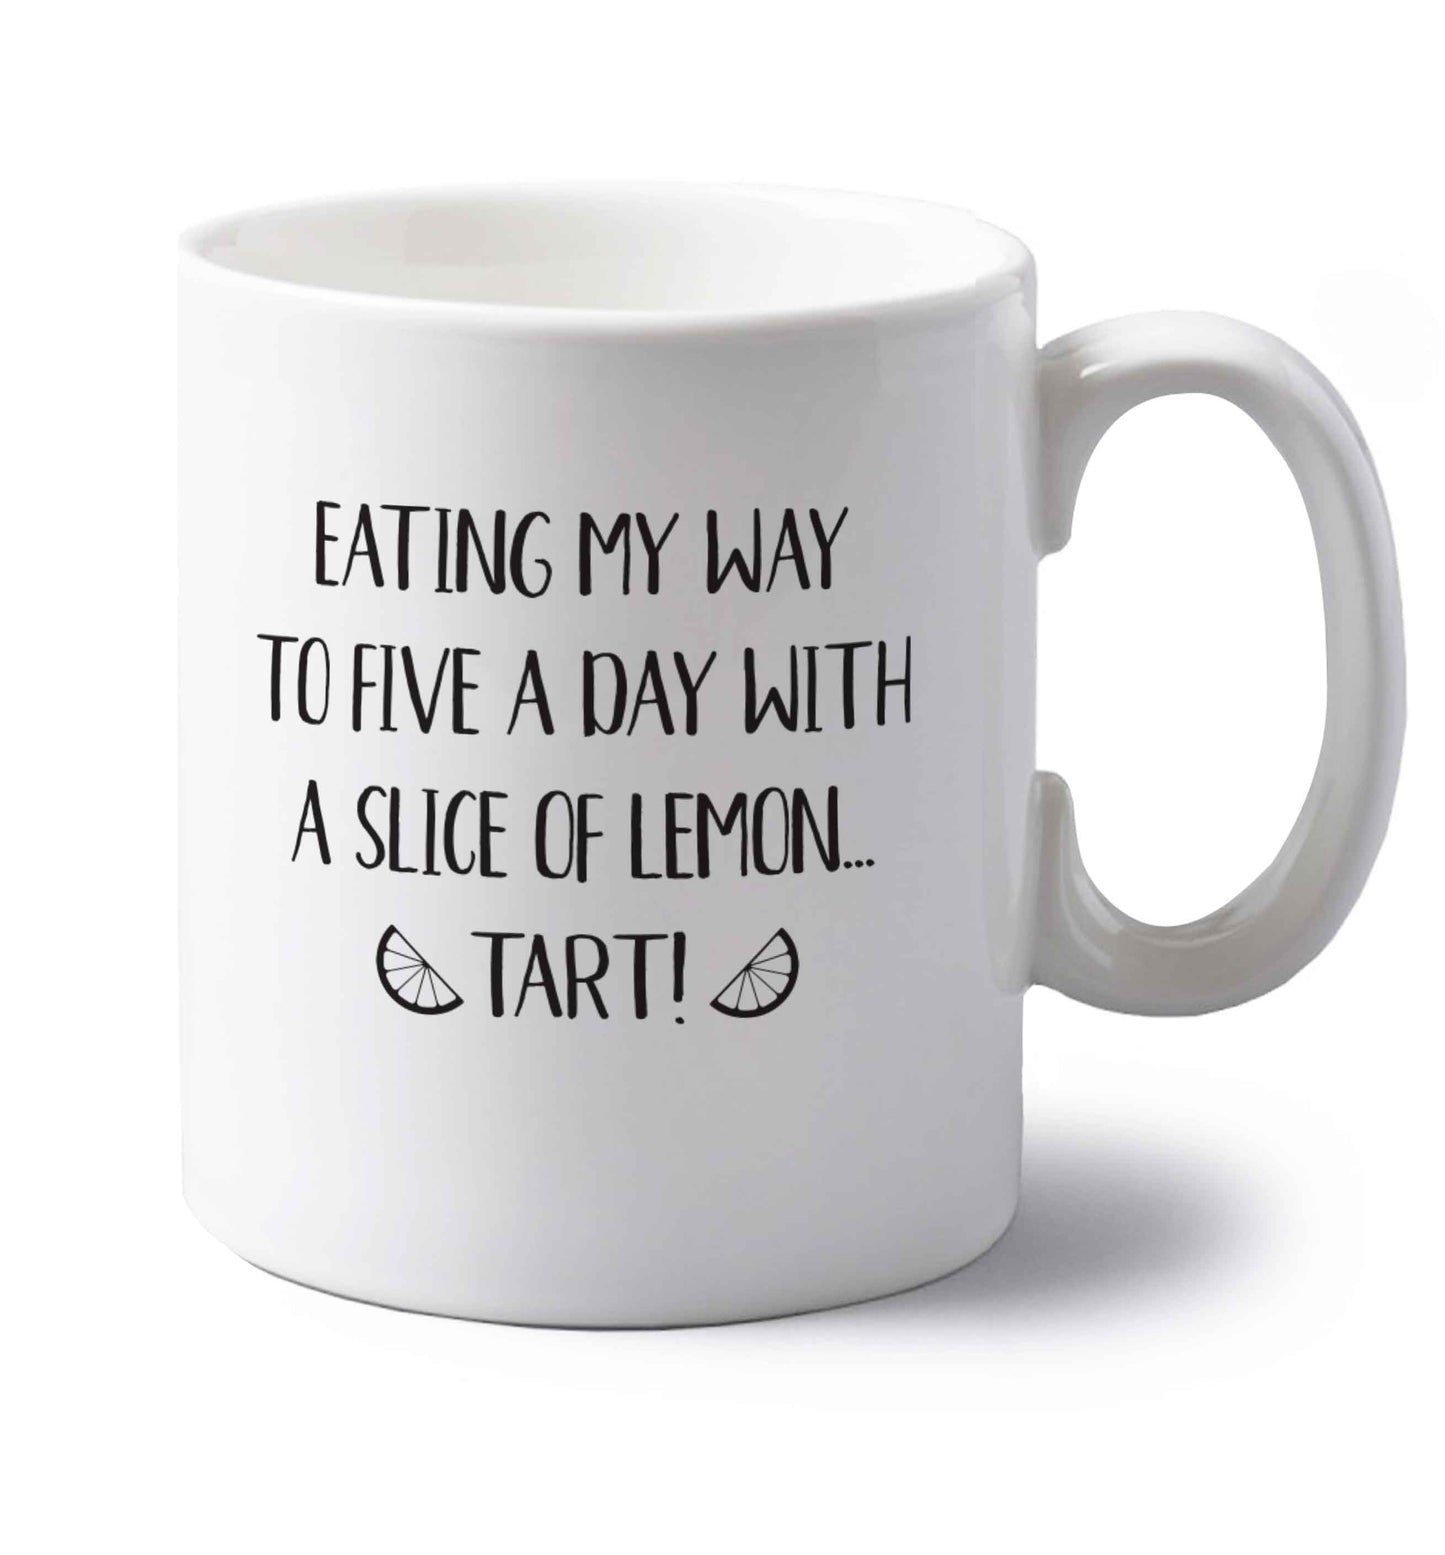 Eating my way to five a day with a slice of lemon tart left handed white ceramic mug 